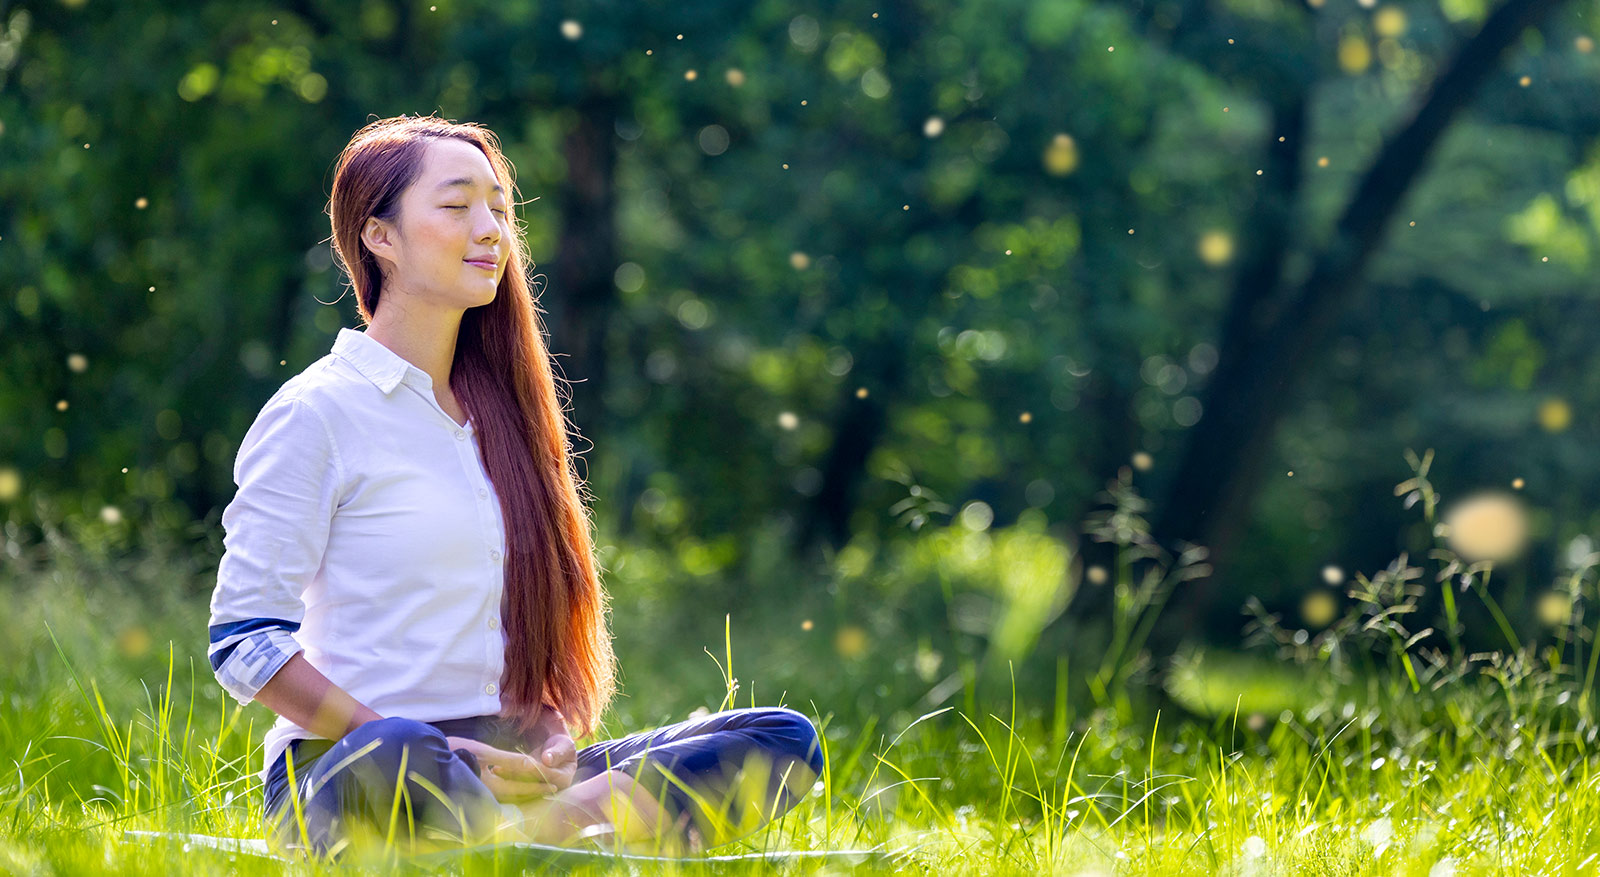 Four wonderful effects of meditation for the health of body and mind